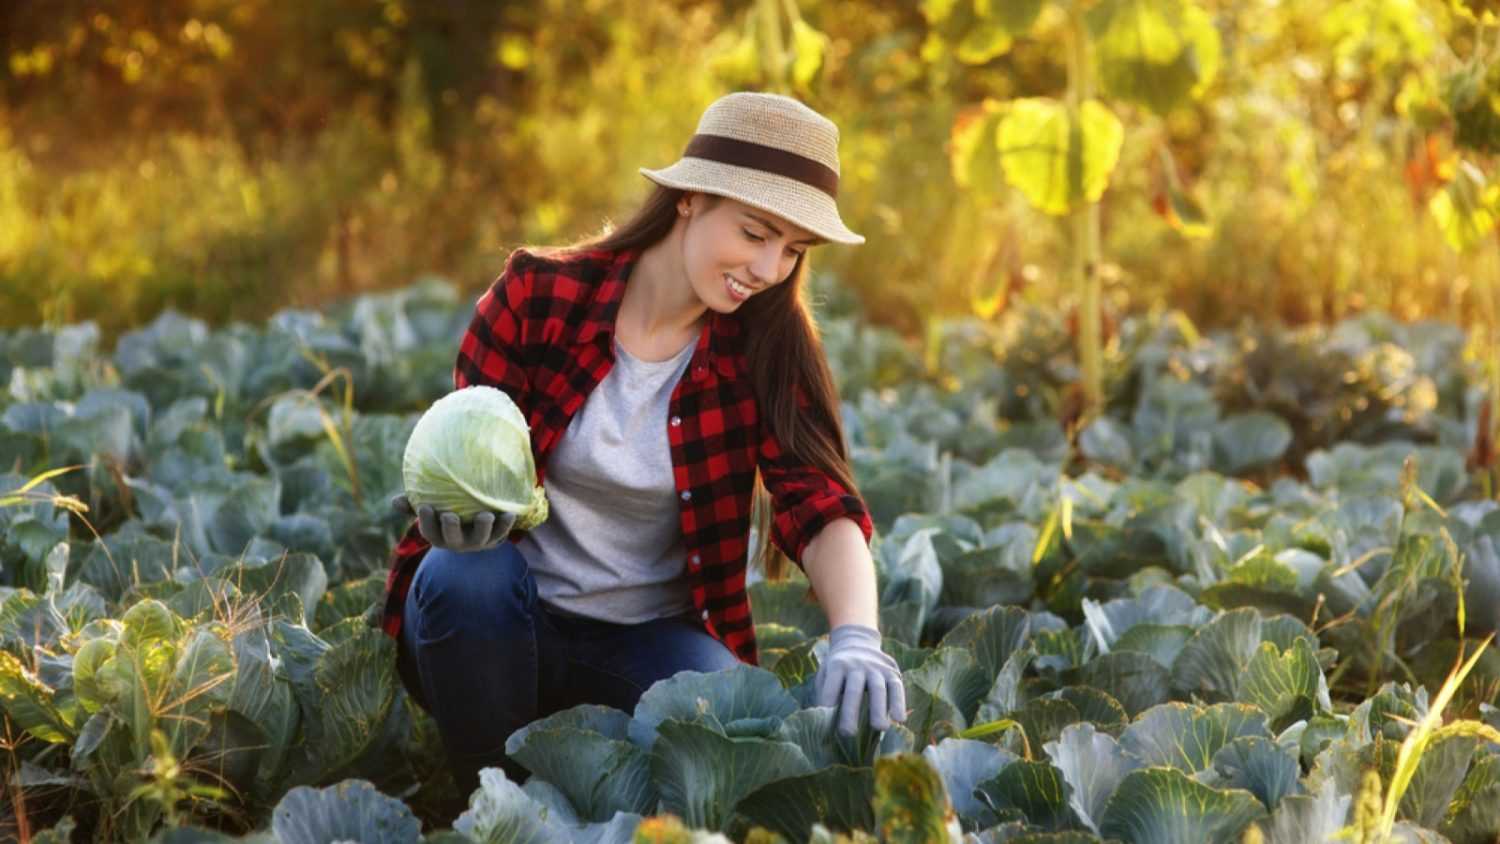 Woman picking Cabbage from garden